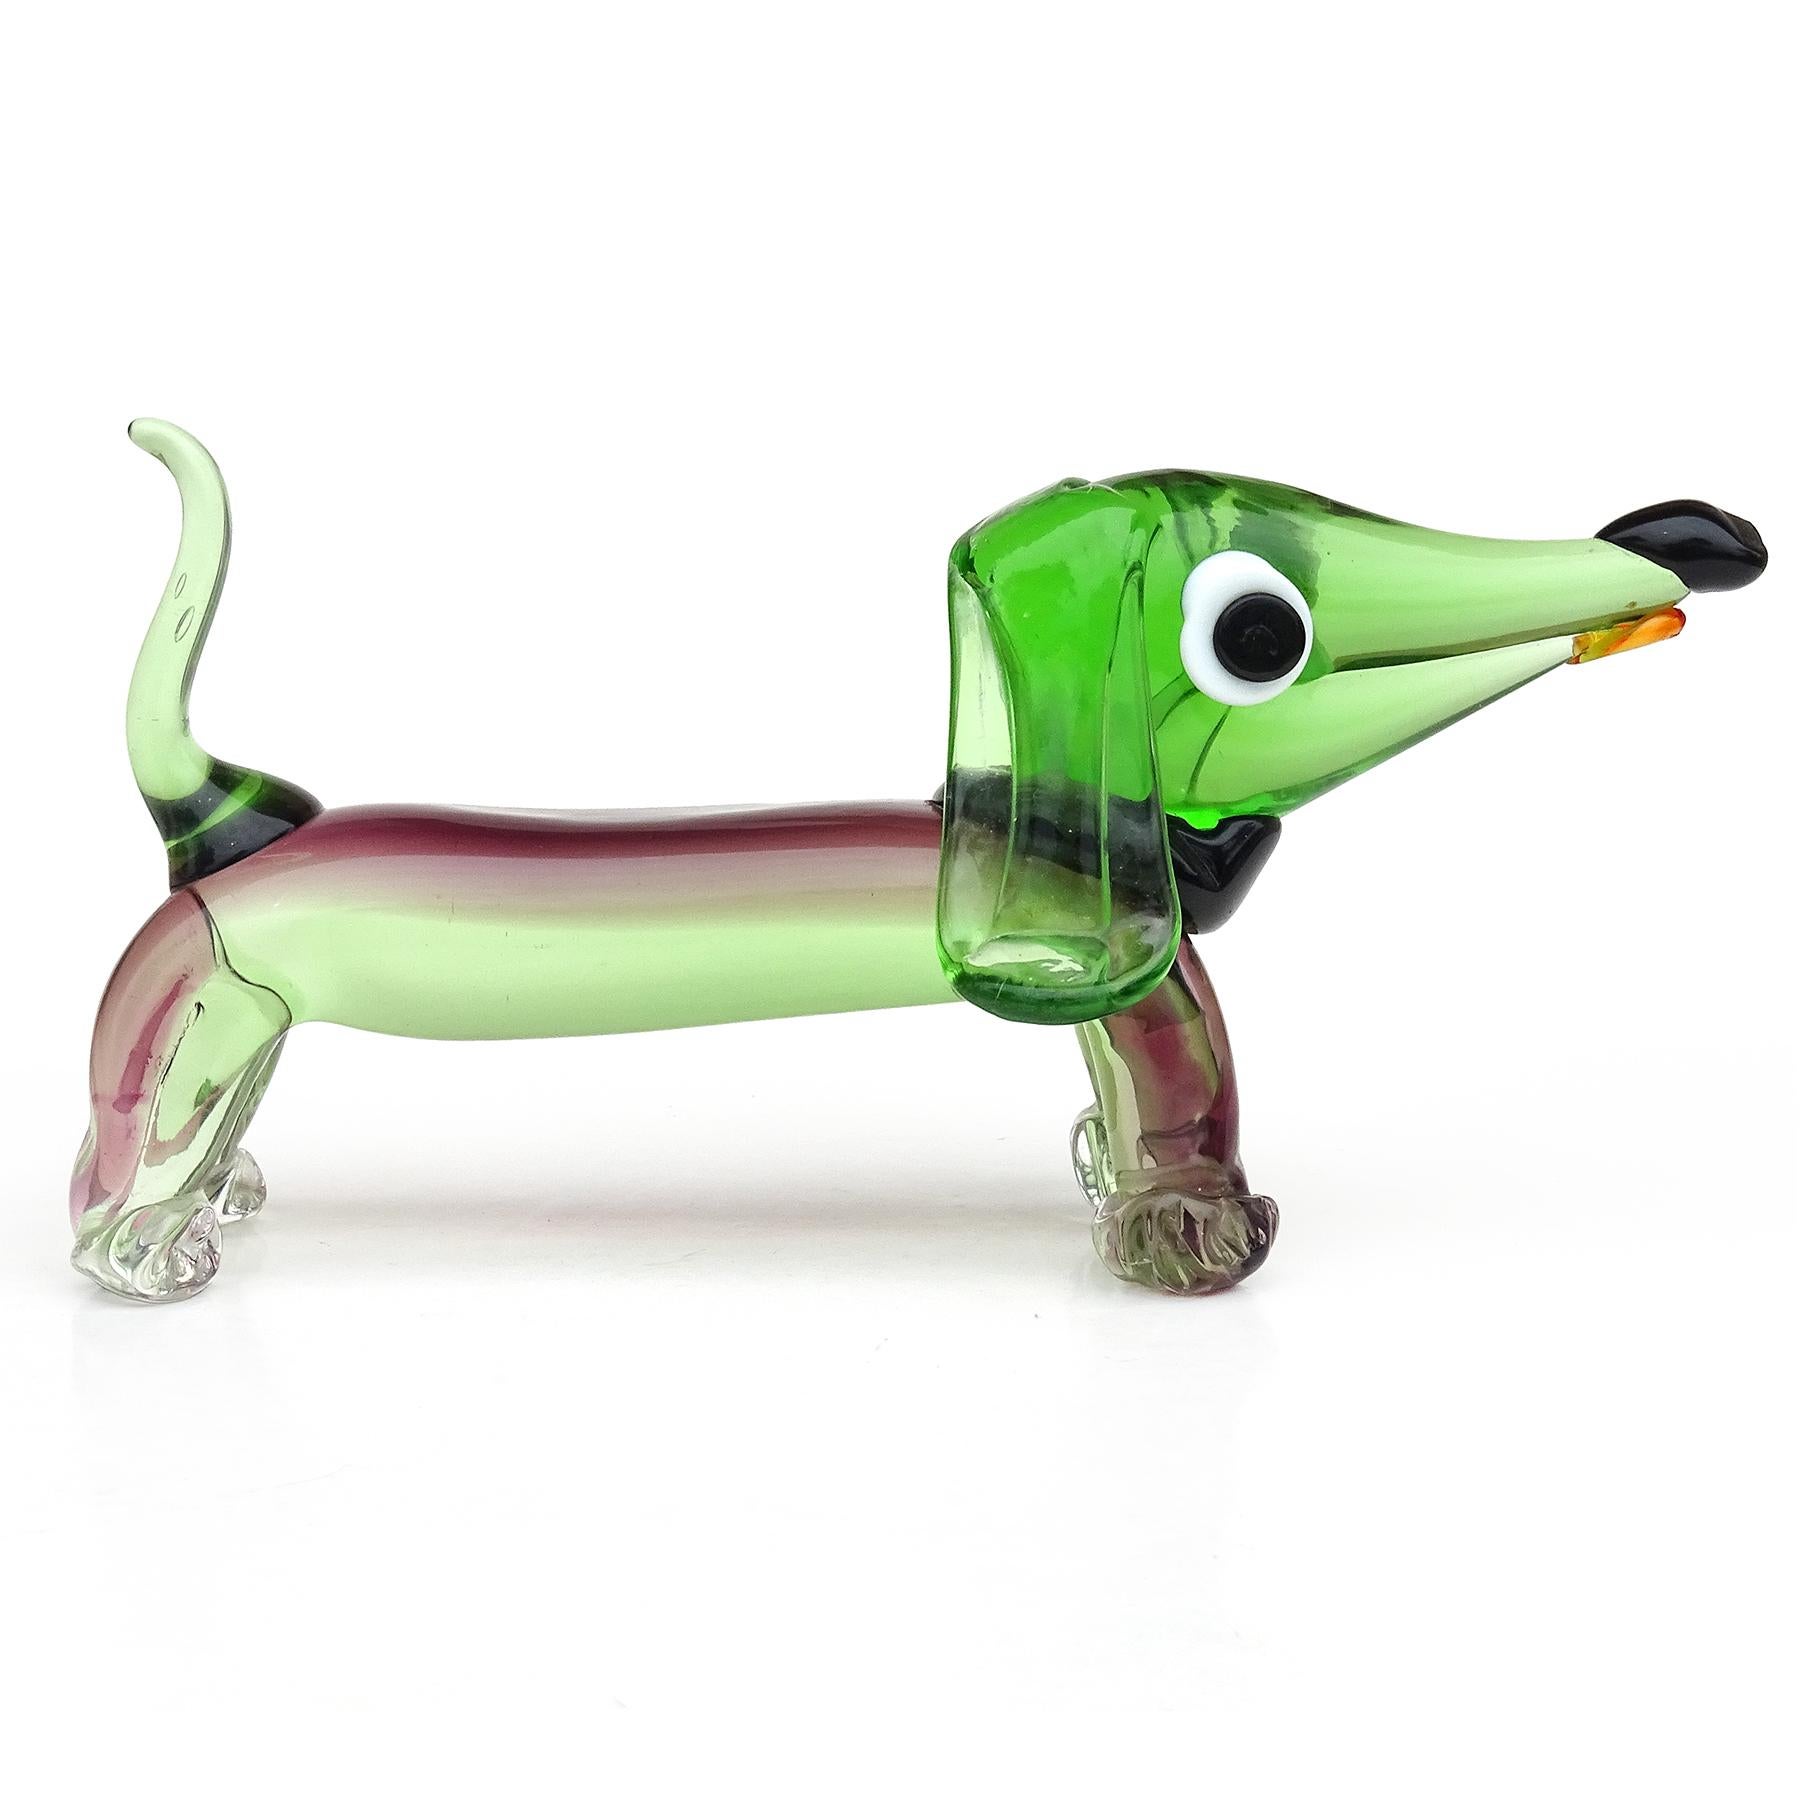 Beautiful, and large, vintage Murano hand blown Sommerso green and purple Italian art glass Dachshund puppy dog sculpture. The puppy has a cartoony feel, with black collar, floppy ears, and tongue sticking out. It has very large eyes, and a curled